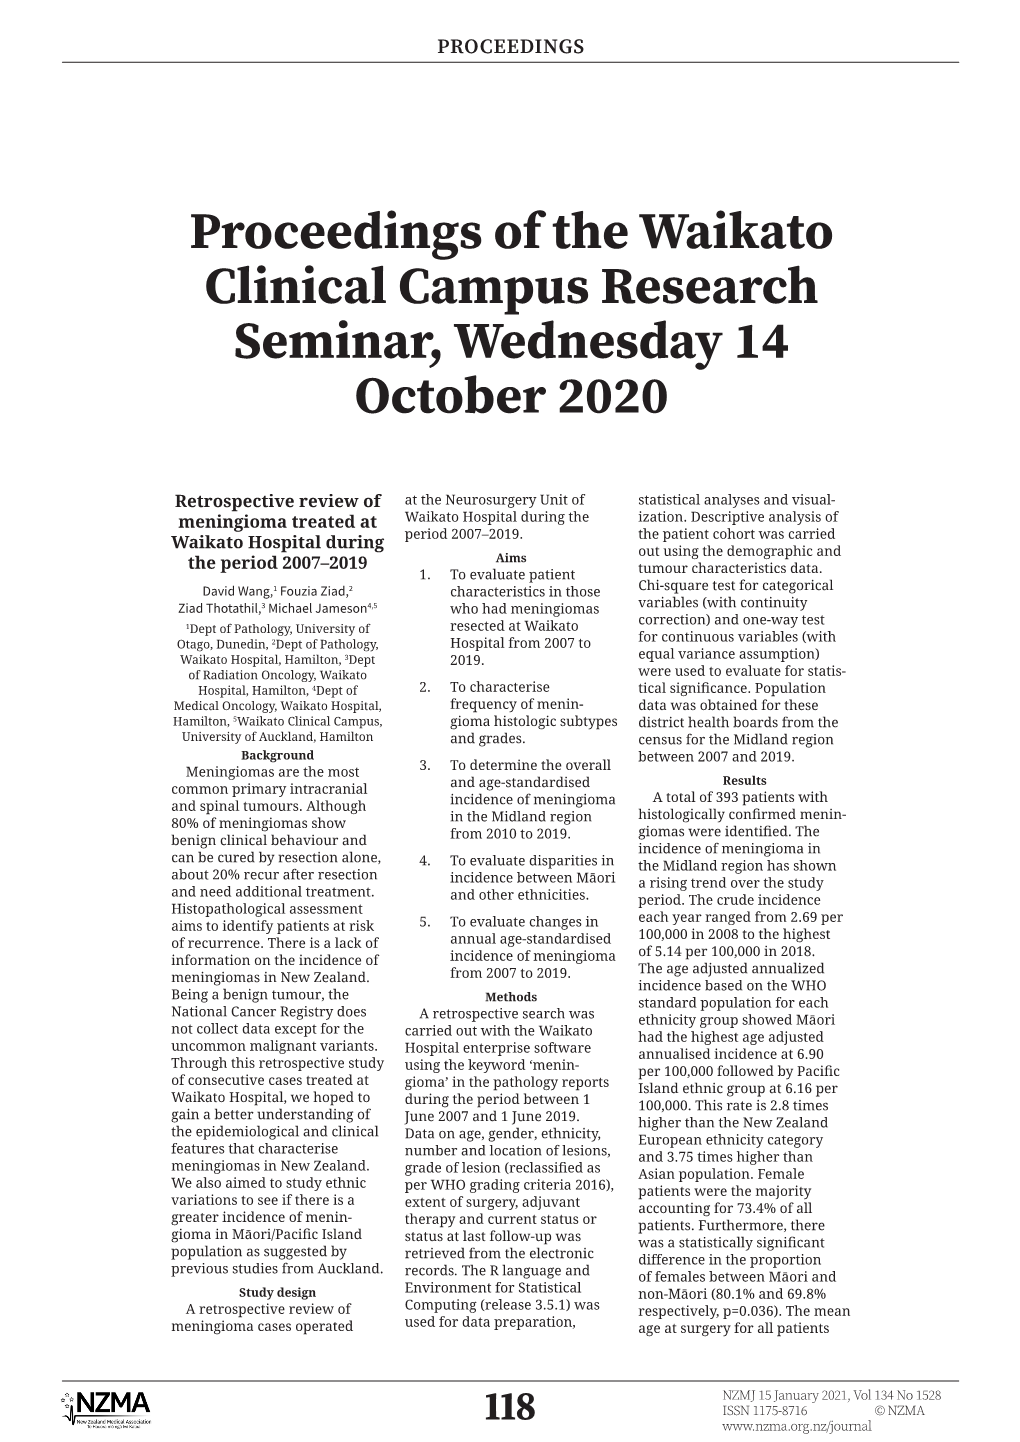 Proceedings of the Waikato Clinical Campus Research Seminar, Wednesday 14 October 2020